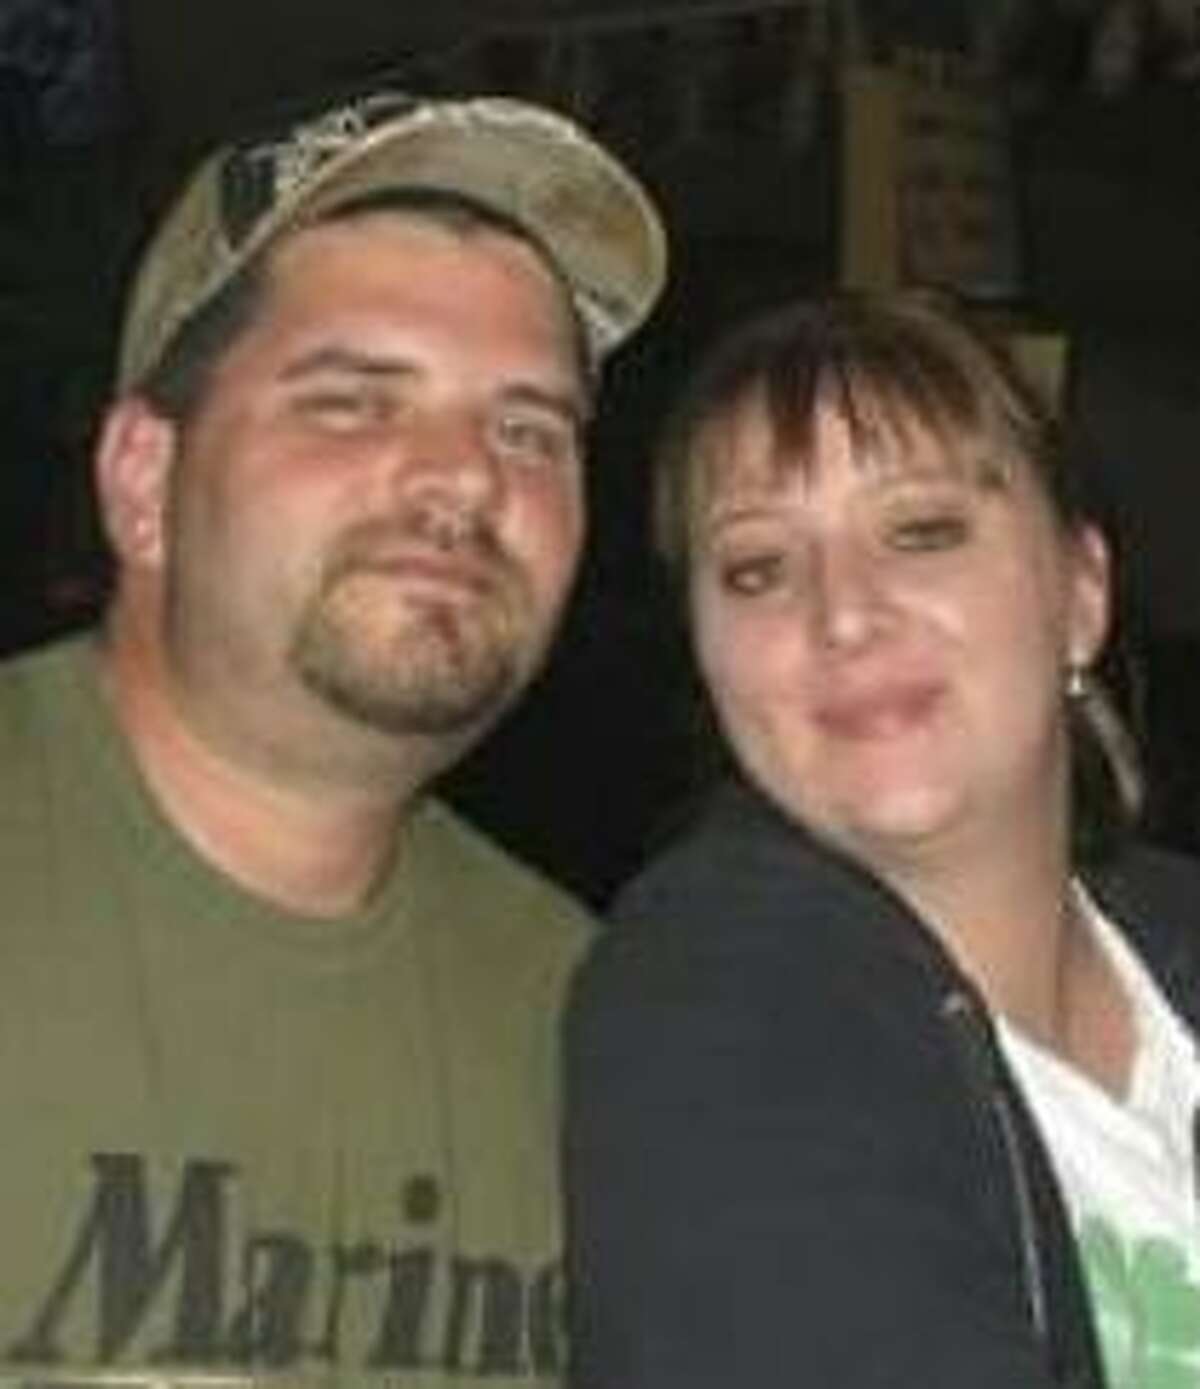 Jonathan Murphy, shown with his wife, Aimee, was a bystander killed during Sunday’s botched robbery at the Rolling Oaks Mall. “He was my rock. … And now he’s gone,” Aimee Murphy said.